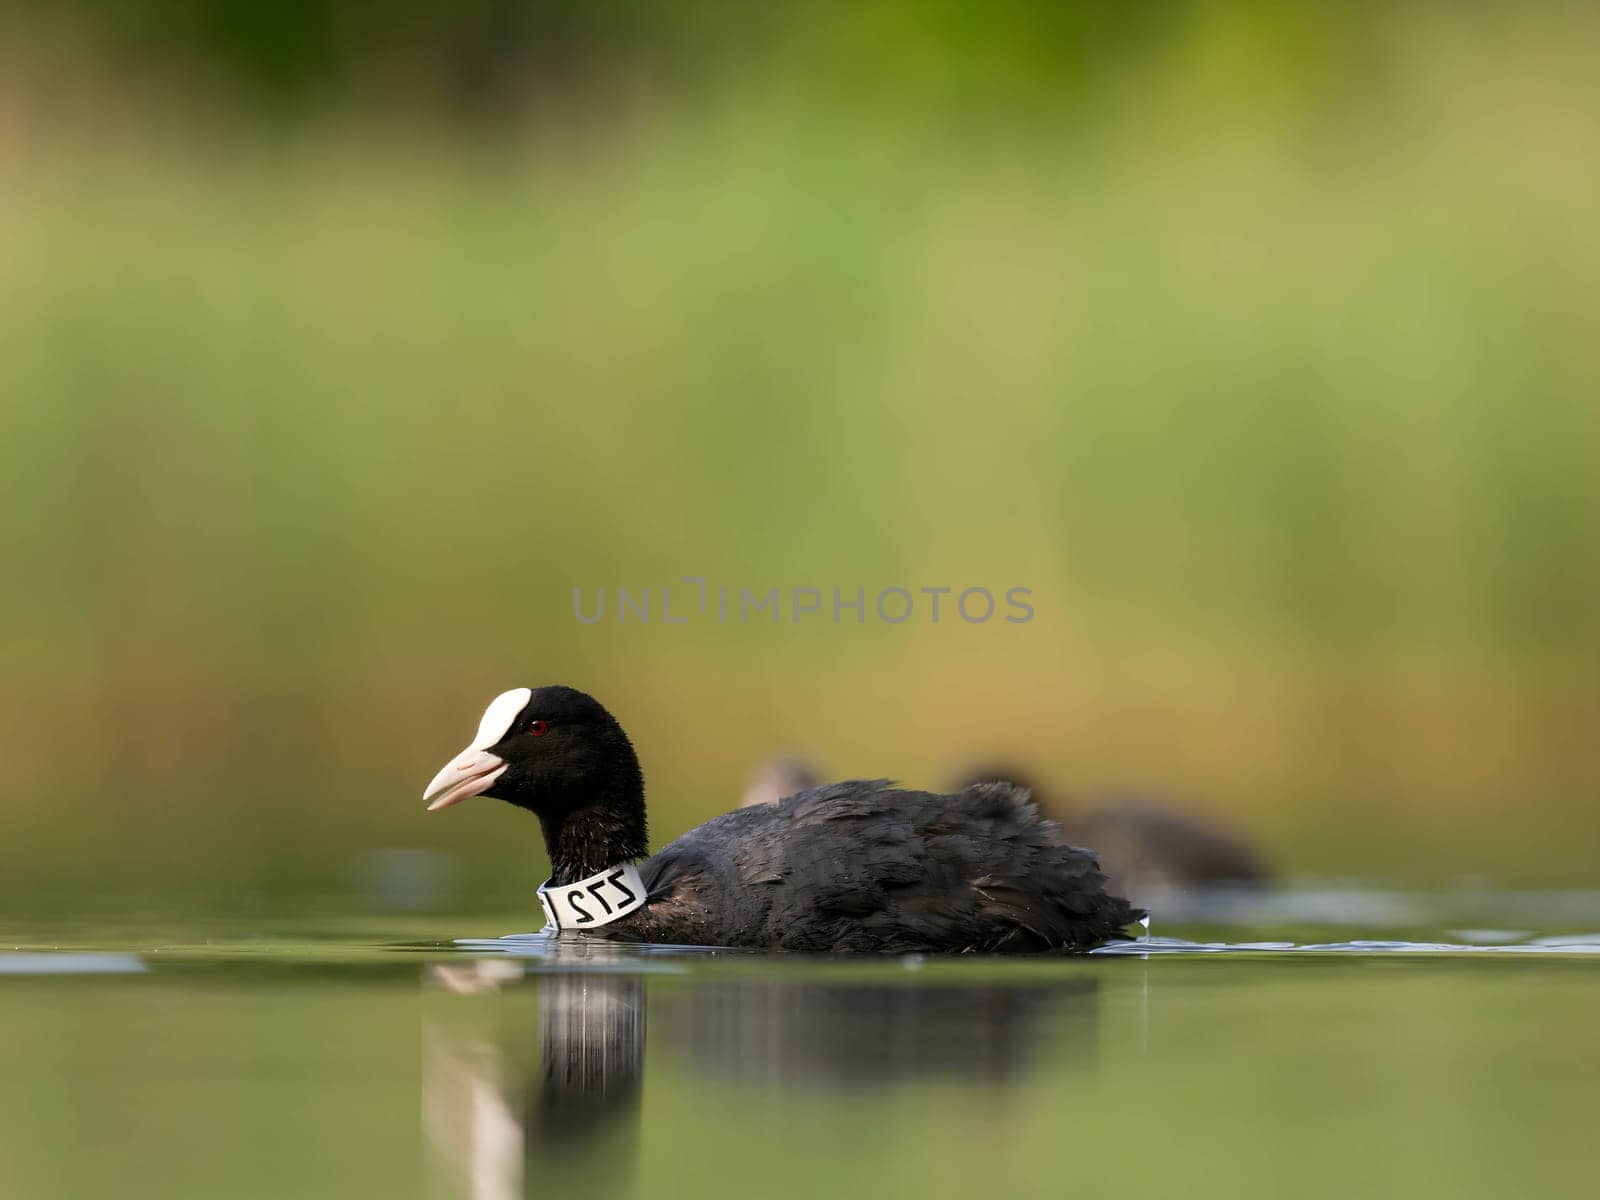 An Eurasian coot gracefully glides on the calm water, surrounded by lush greenery, creating a serene and picturesque scene in nature's embrace.